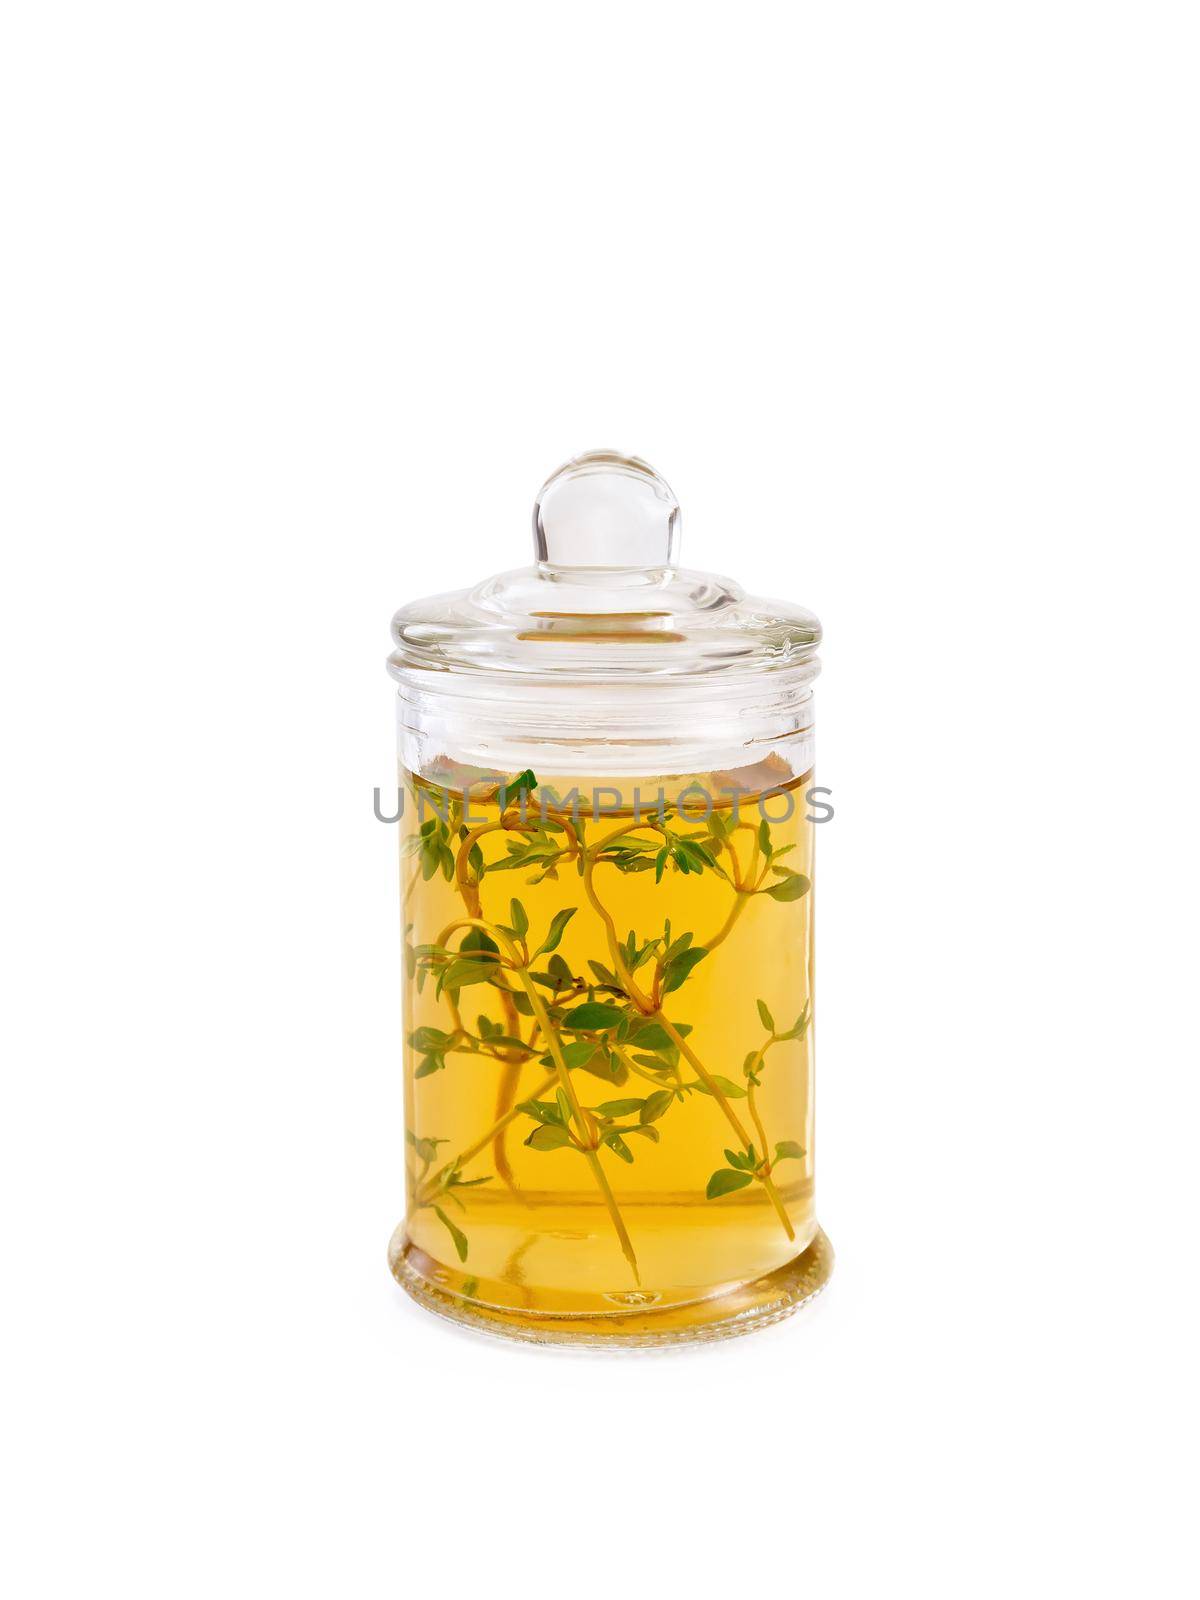 Vegetable oil or vinegar with thyme in a glass jar isolated on white background